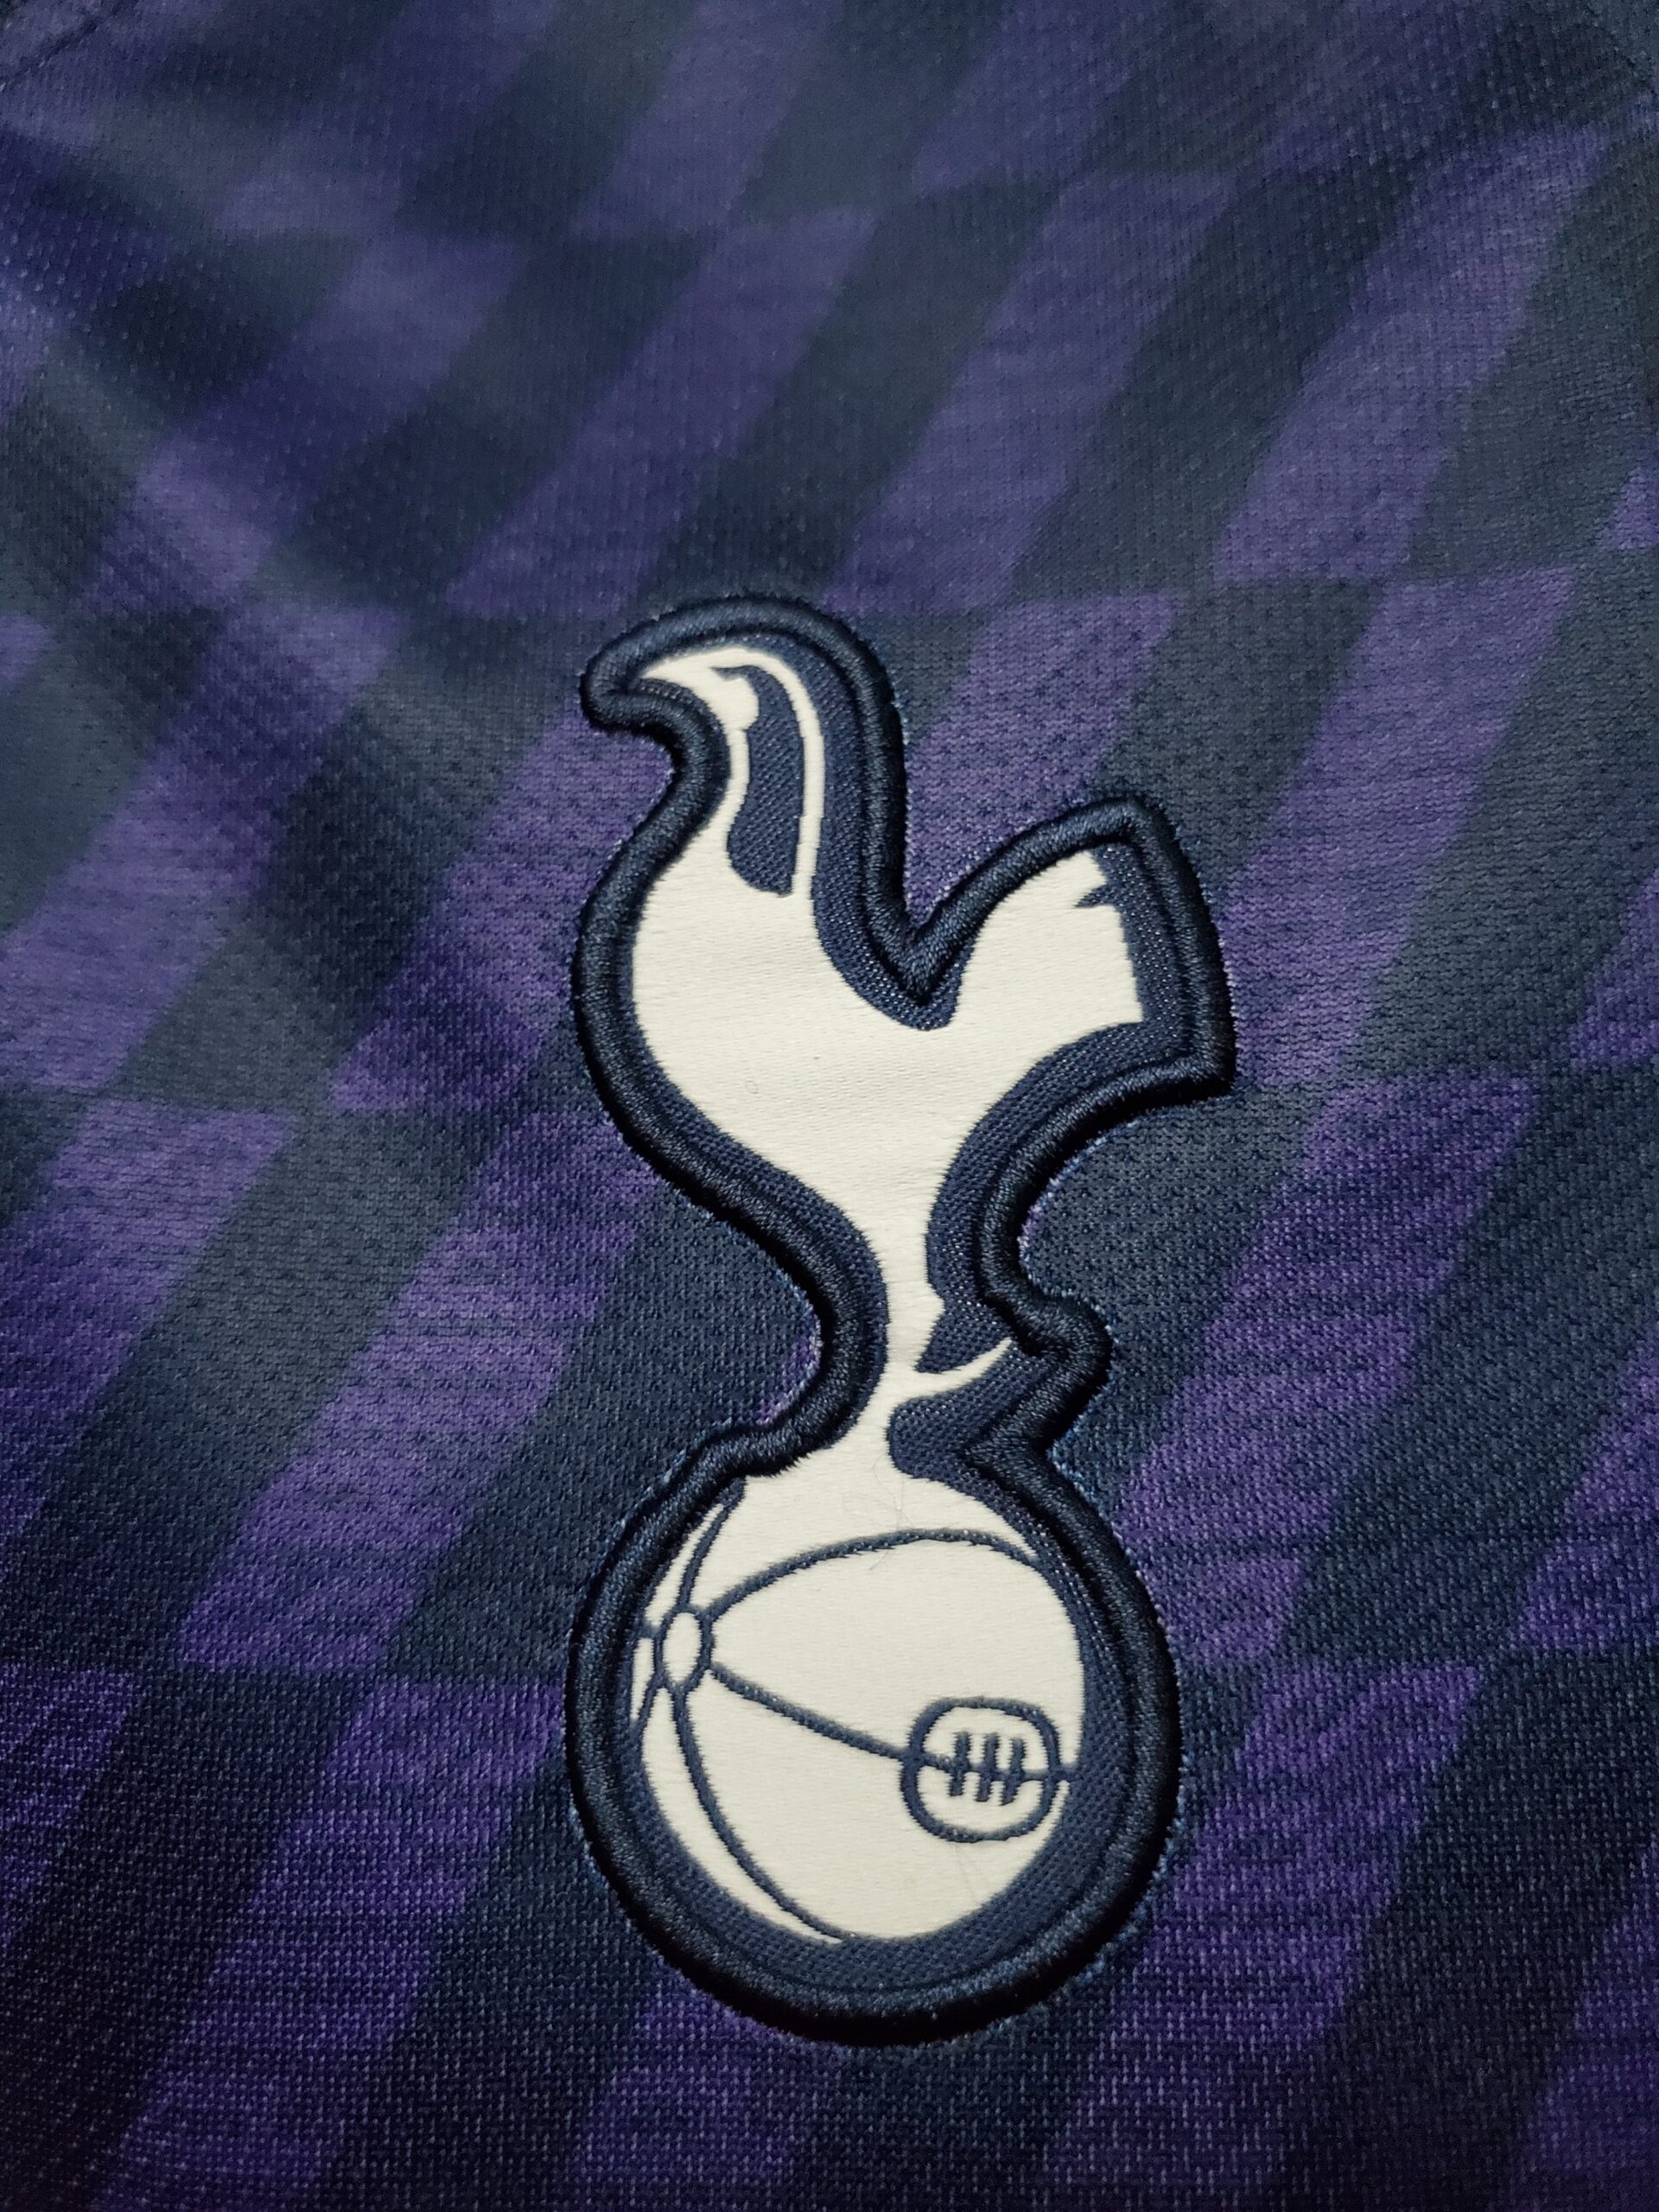 Tottenham Hotspur on X: 2019/20 away. Pre-order yours now